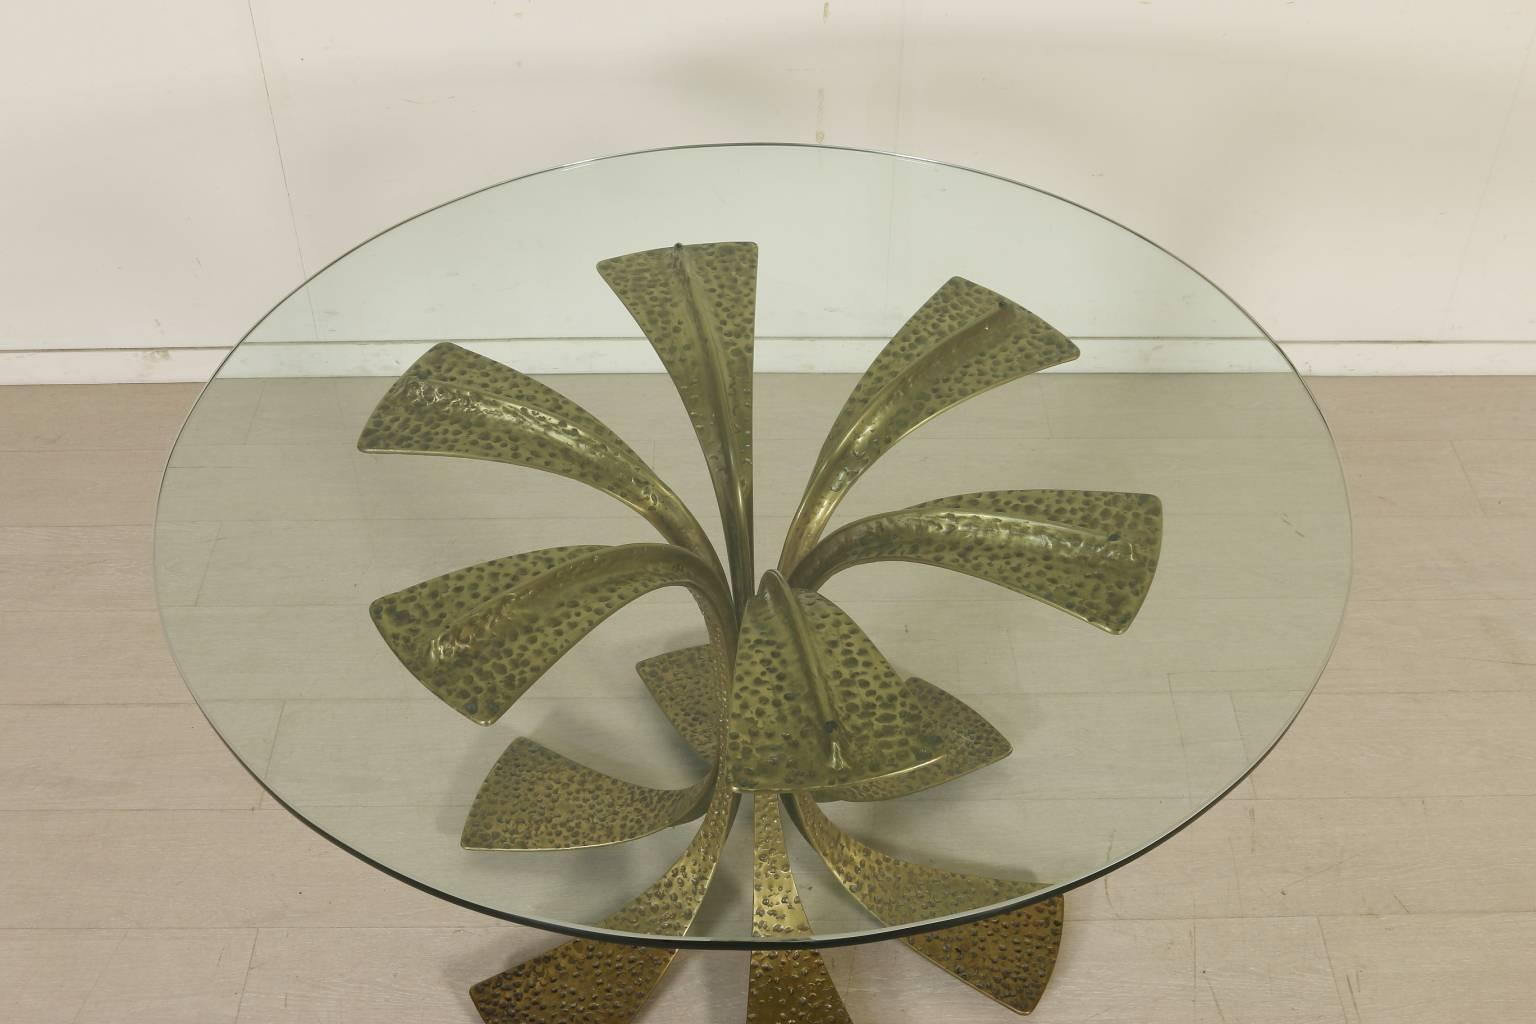 A table by Luciano Frigerio melted bronze basement and glass top. Manufactured in Italy, 1970s.